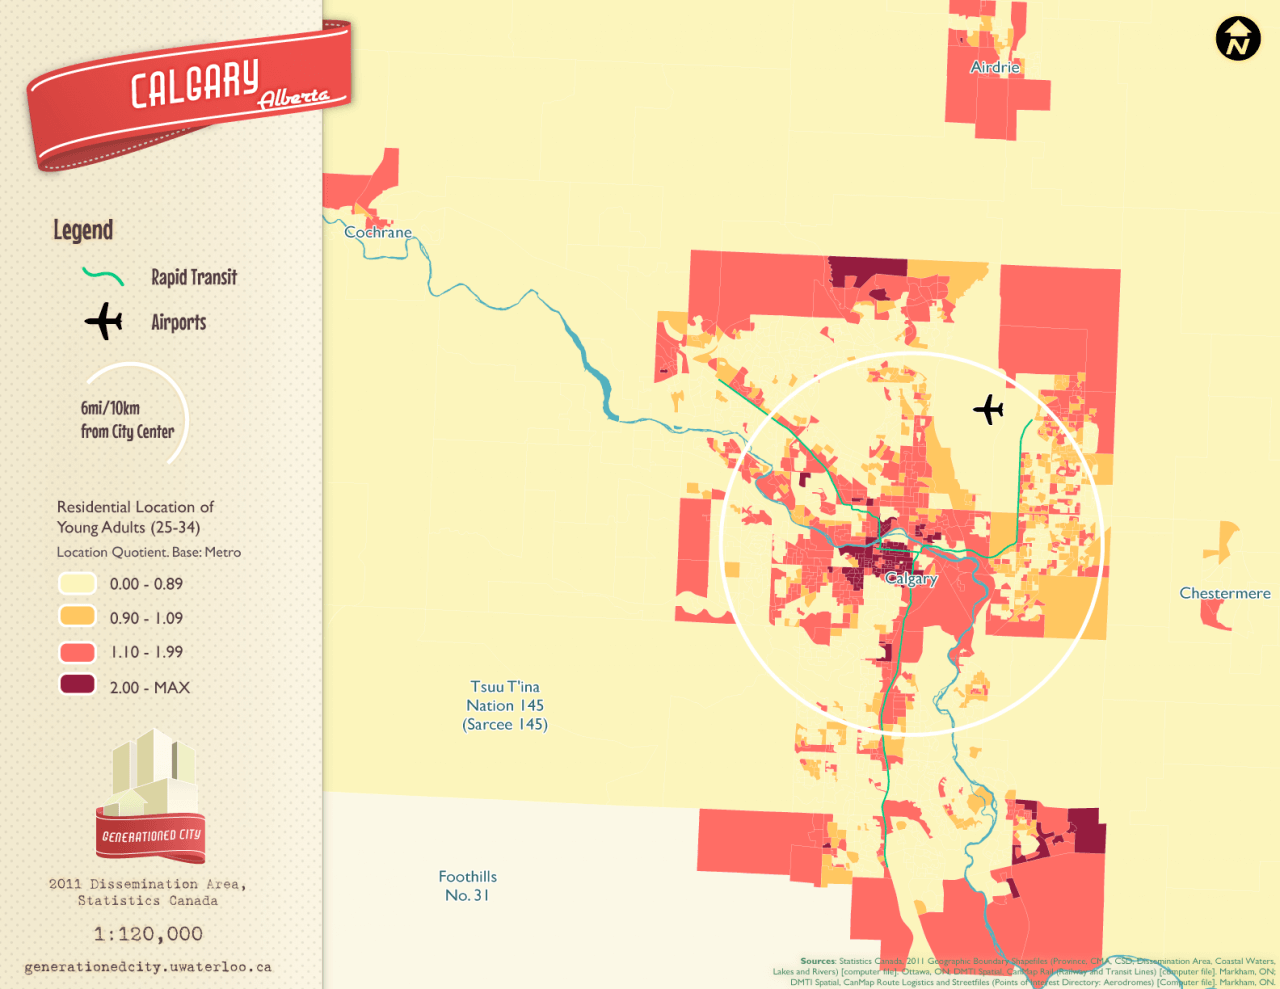 Residential location of young adults in Calgary.